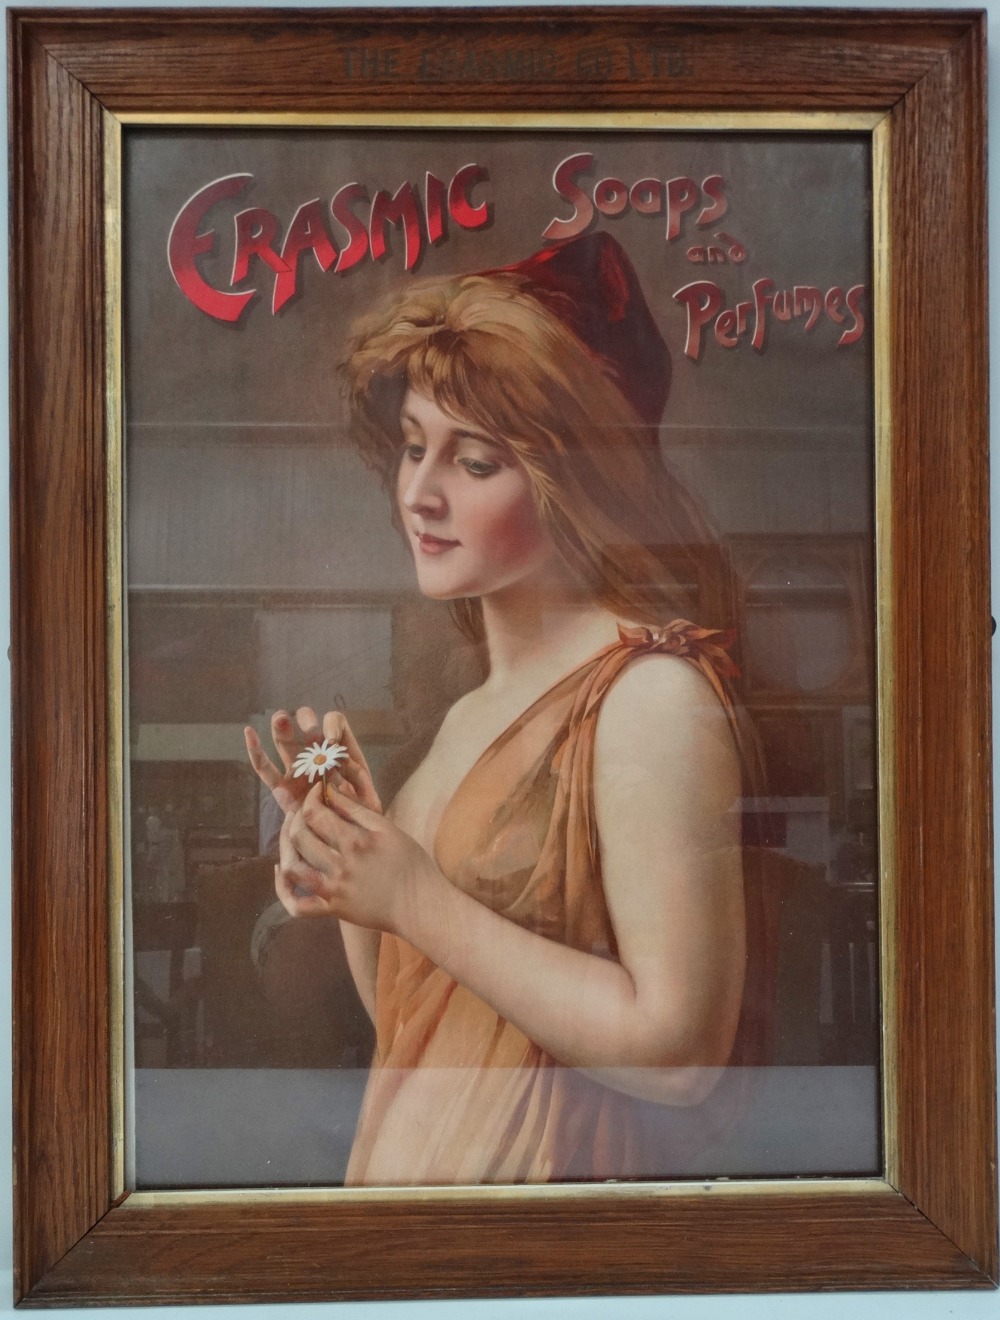 An early 20th century oak framed advertising frame and print, the oak frame stamped THE ERASMIC CO